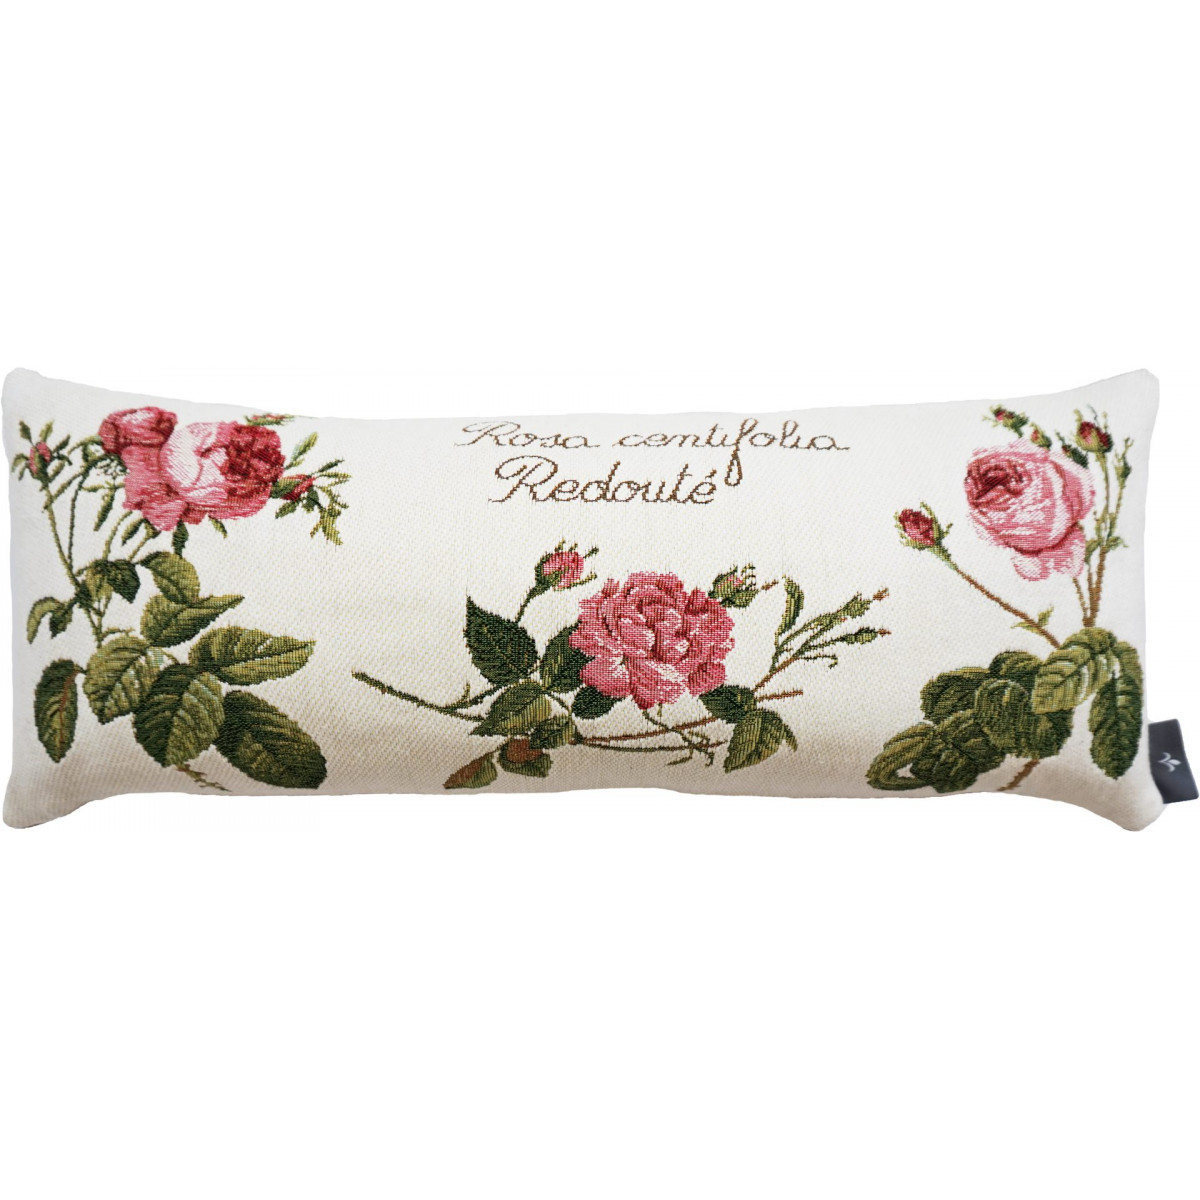 Coussin roses de redouté made in france blanc 22x58